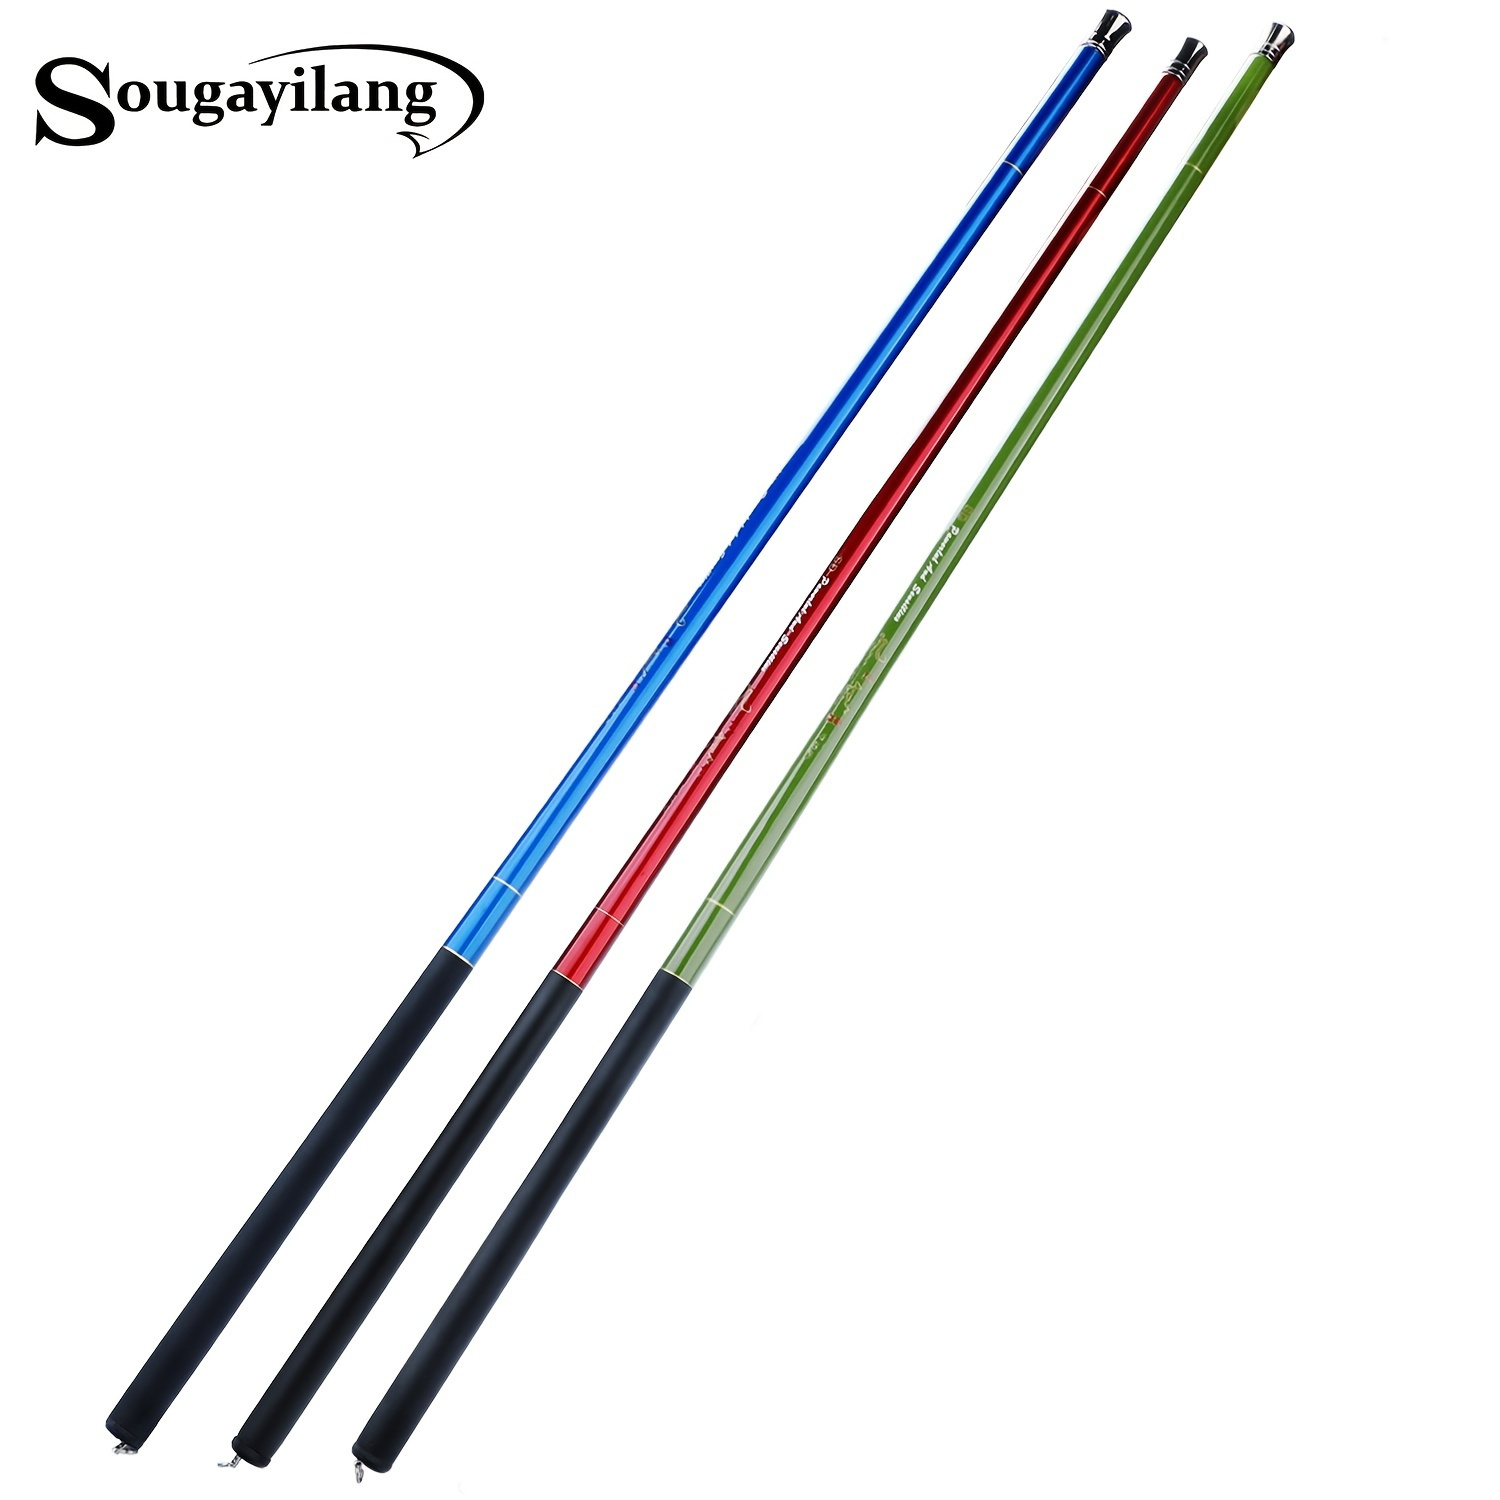 Sougayilang Carbon Fiber Fishing Rod Telescopic Ultra-light Hard Pole For  Stream Freshwater Fishing Pole, Shop Now For Limited-time Deals